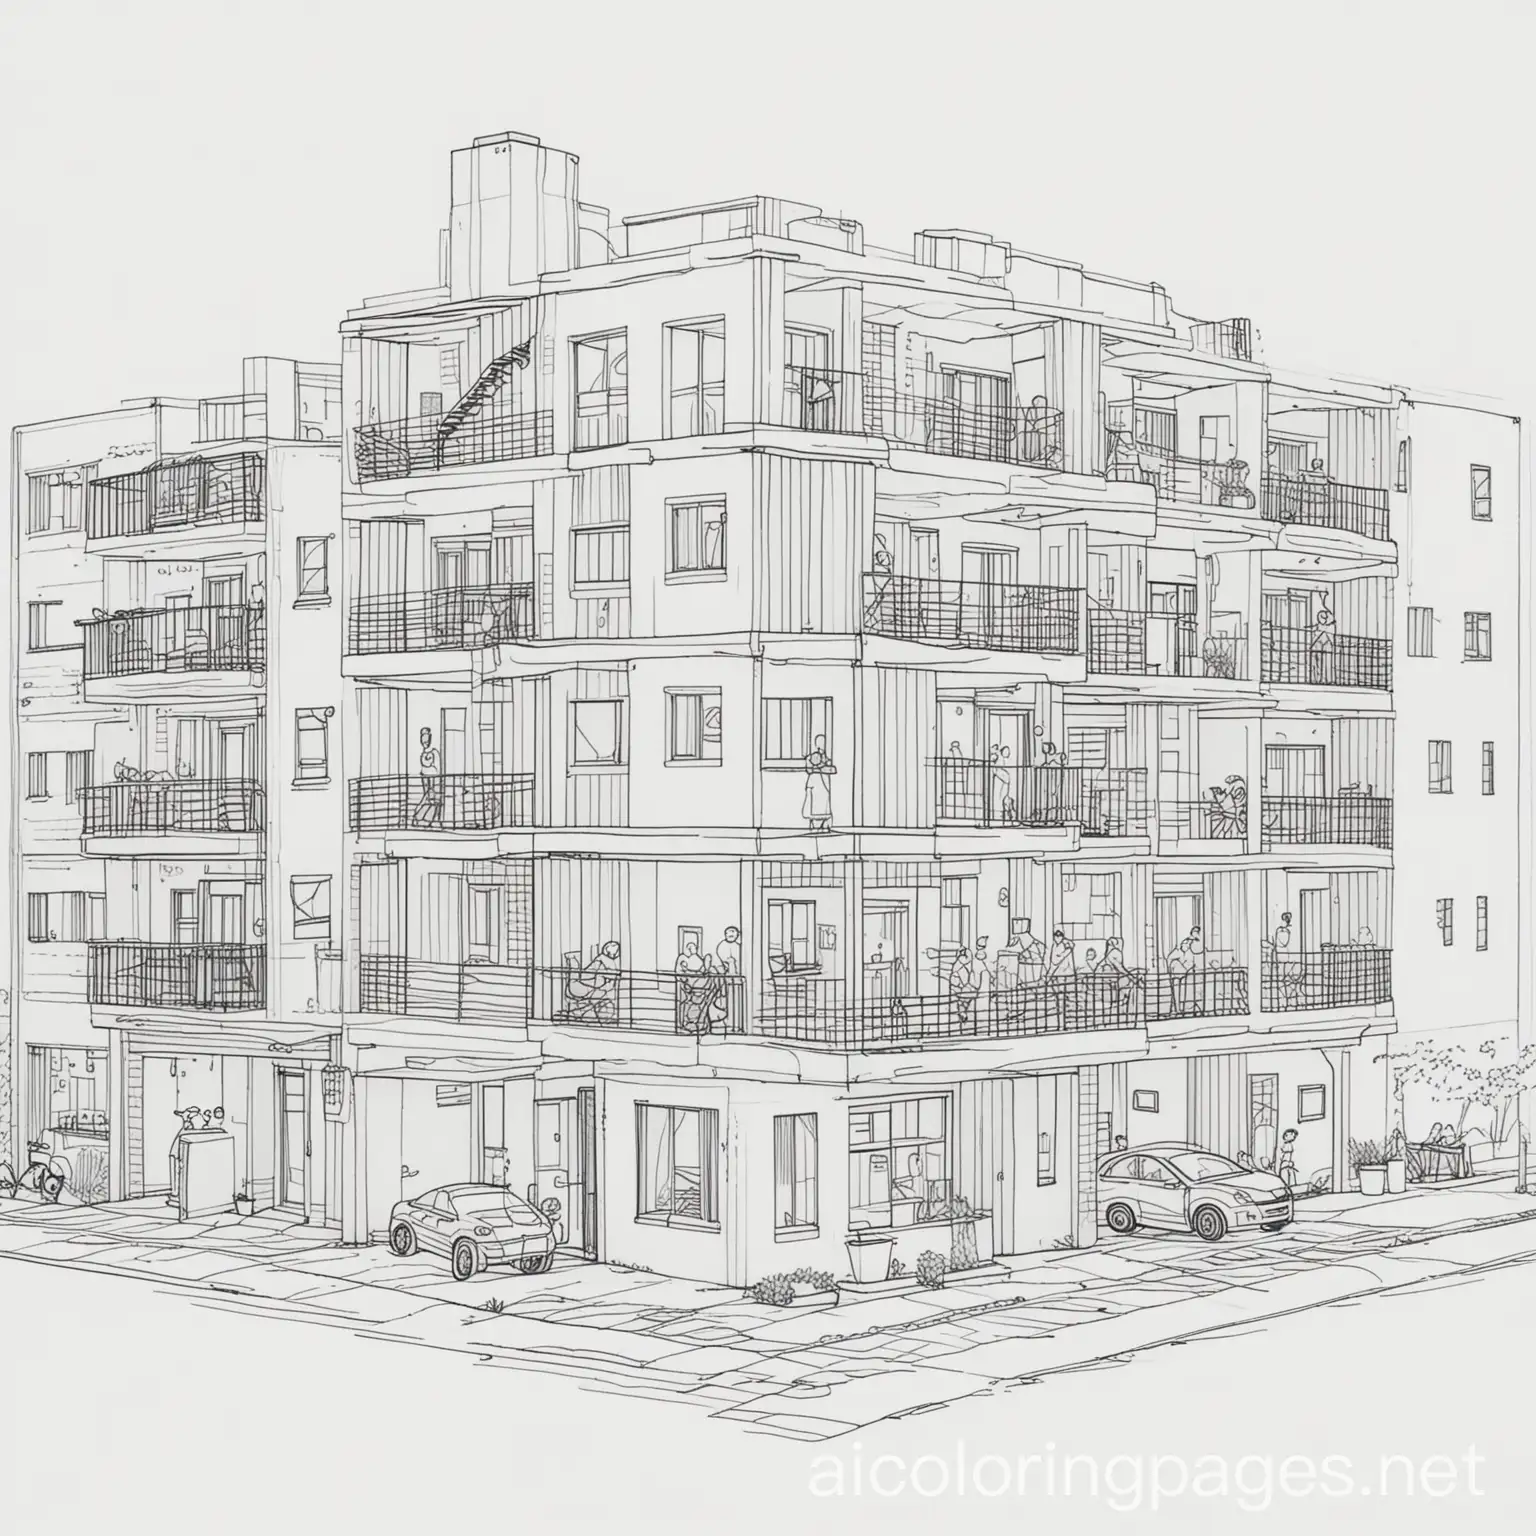 modern apartments with offices and construction and people
, Coloring Page, black and white, line art, white background, Simplicity, Ample White Space. The background of the coloring page is plain white to make it easy for young children to color within the lines. The outlines of all the subjects are easy to distinguish, making it simple for kids to color without too much difficulty